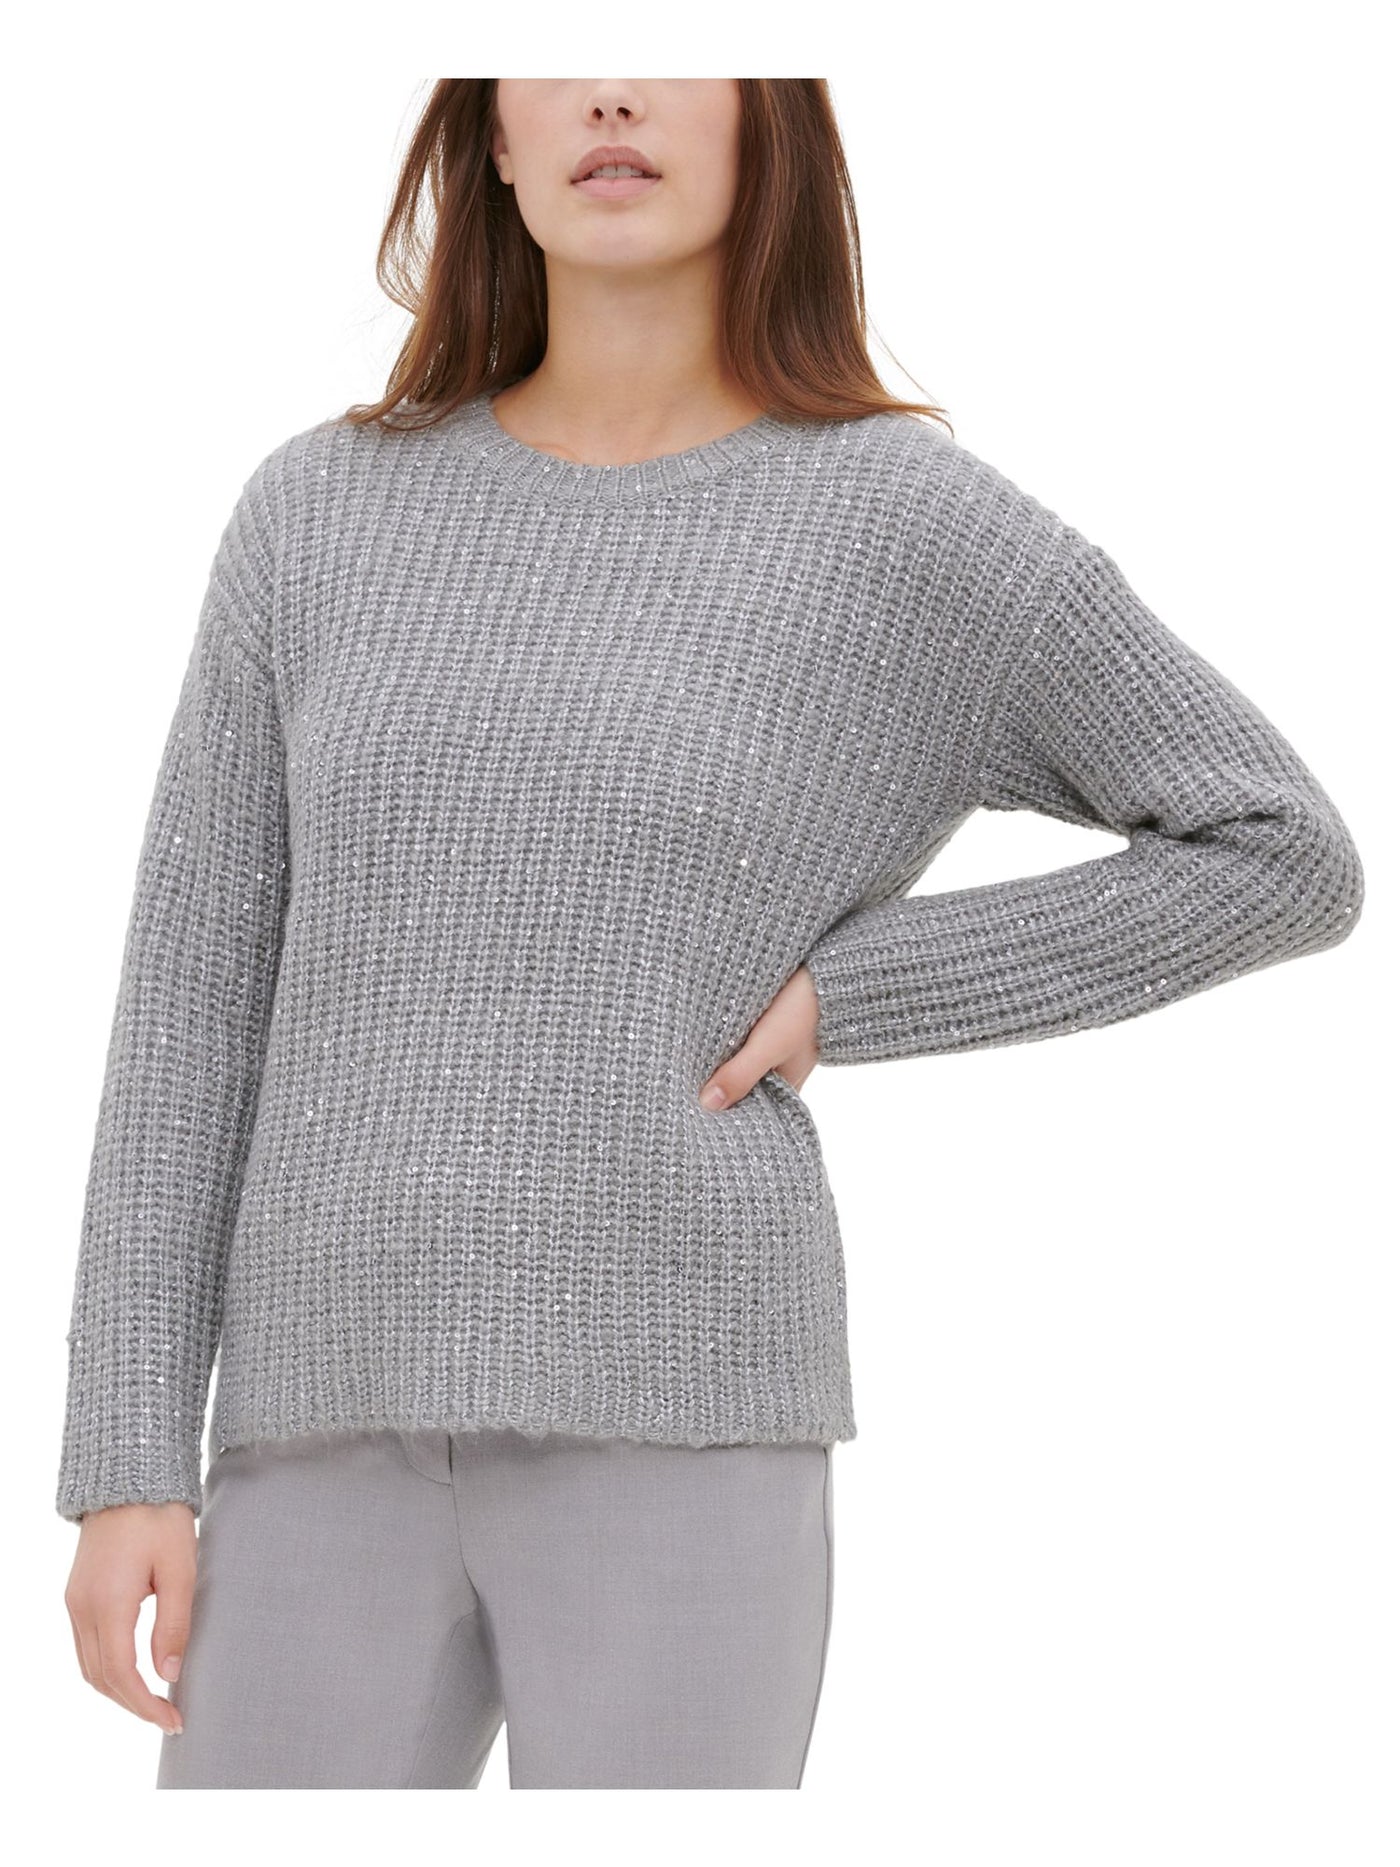 CALVIN KLEIN Womens Silver Knitted Long Sleeve Crew Neck Sweater XL